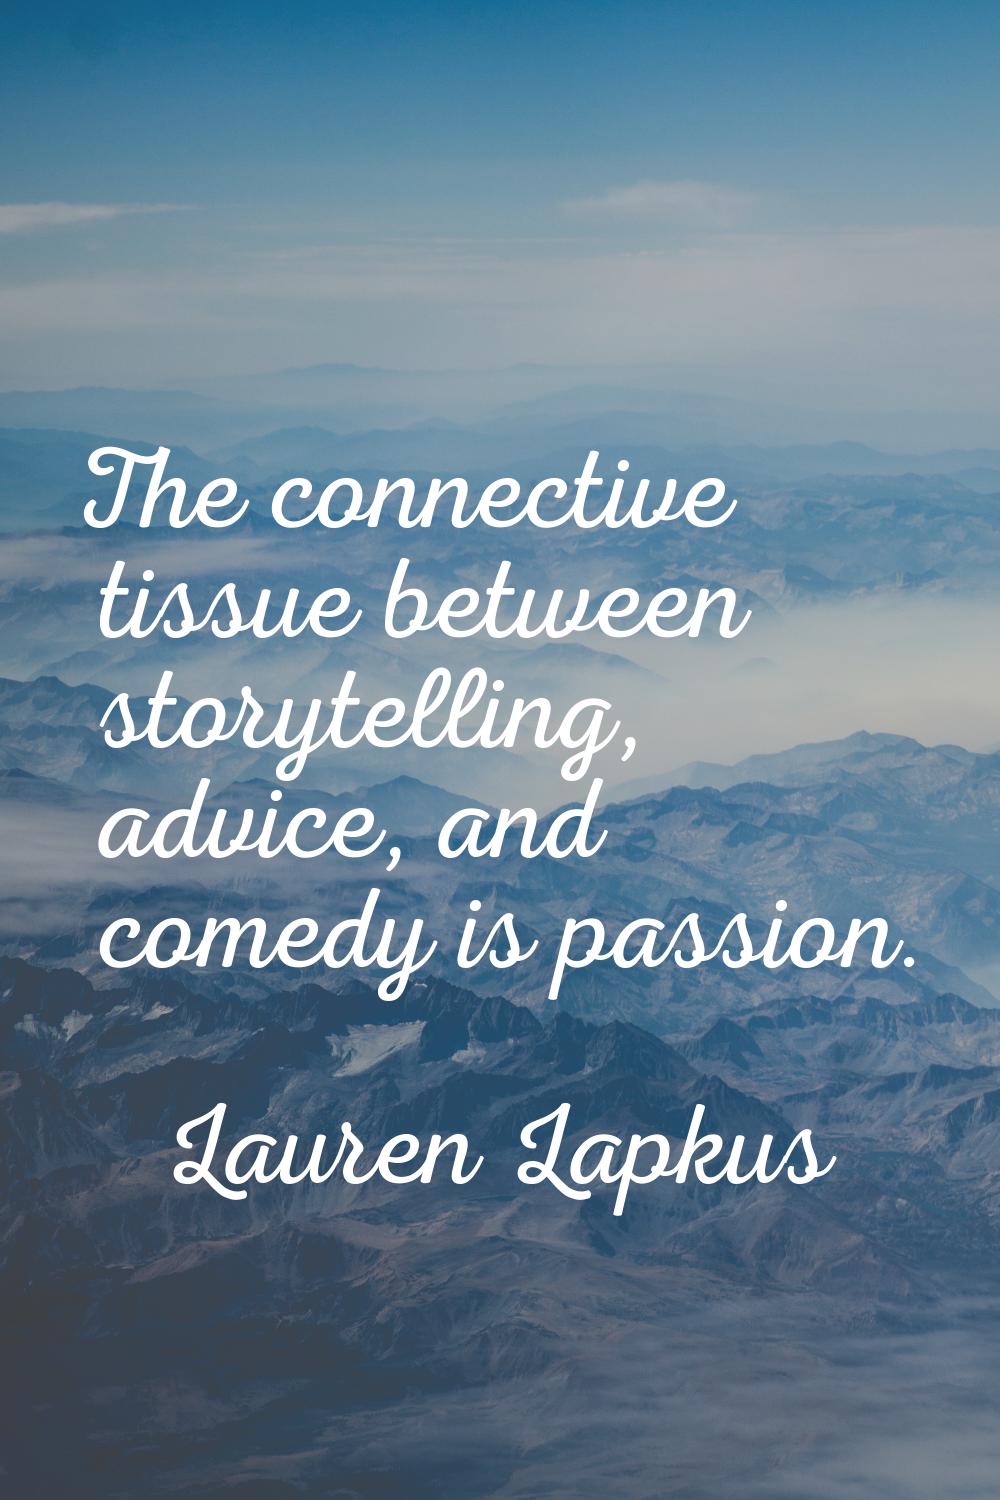 The connective tissue between storytelling, advice, and comedy is passion.